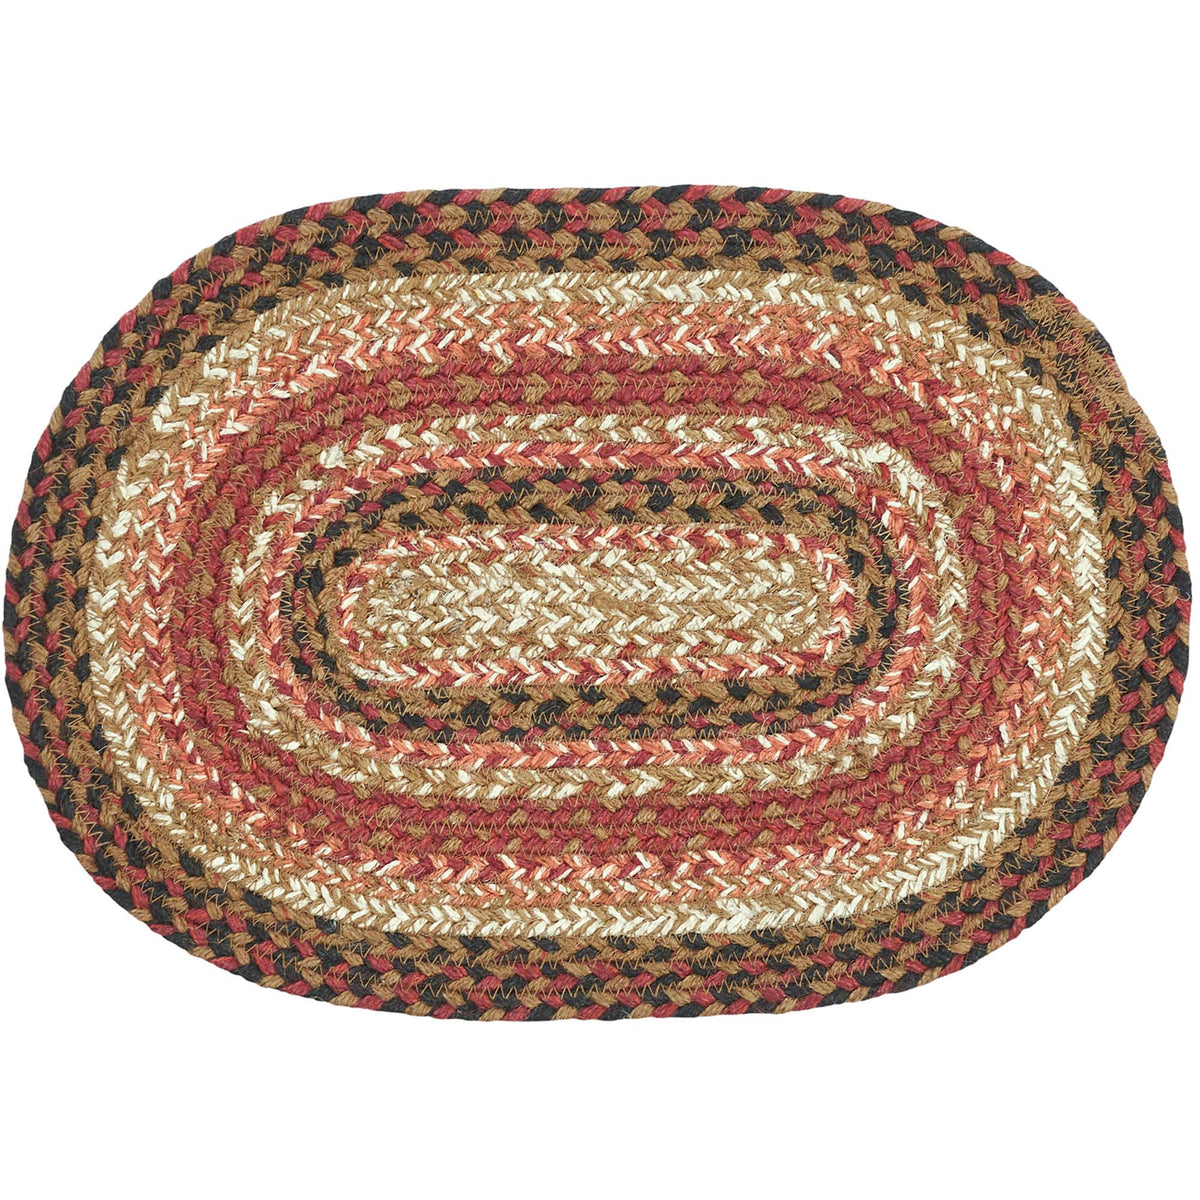 Ginger Spice Jute Oval Placemat 10x15